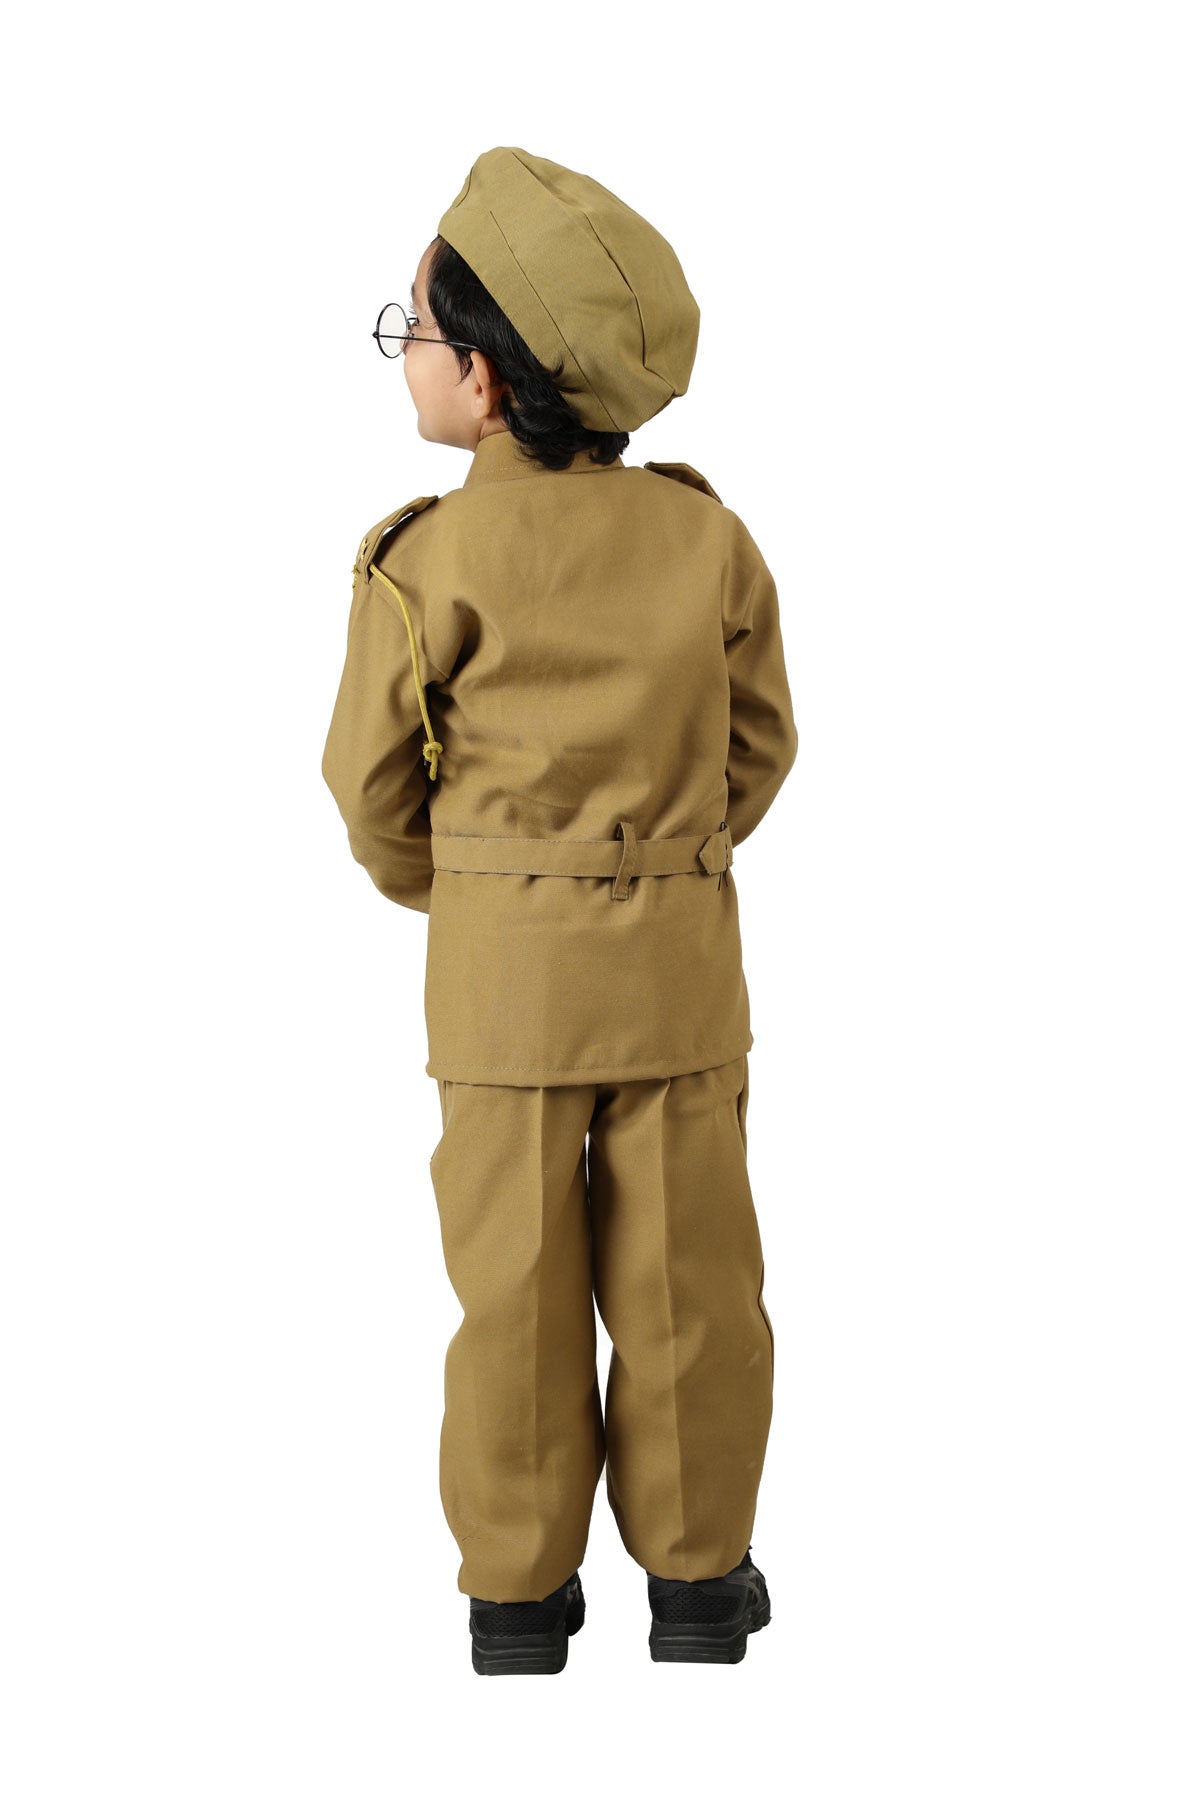 Buy 7T9 Army Dress For Kids, Indian Military Soldier Fancy Dress Costume  (1-2 Year_Multicolor) Online at Low Prices in India - Amazon.in